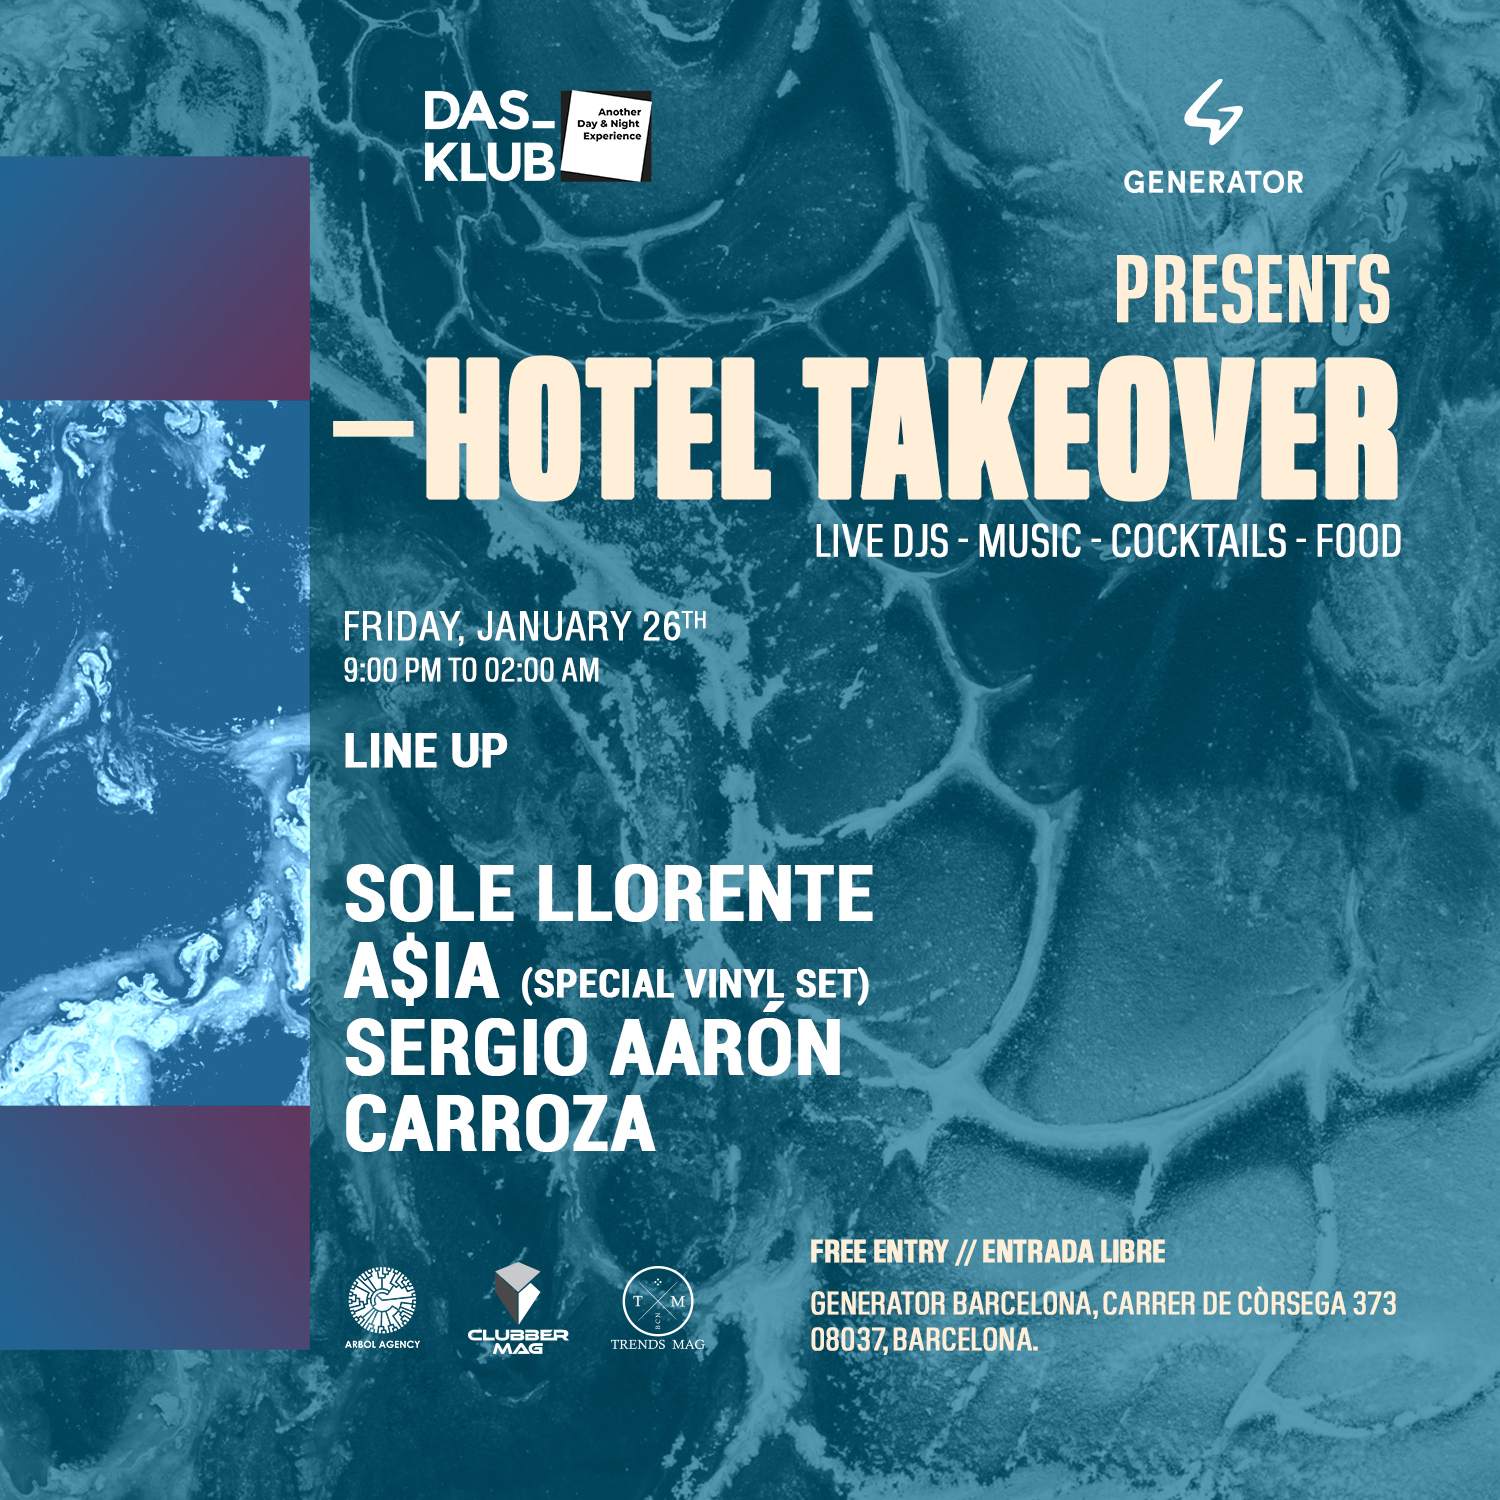 DAS-KLUB Pres HOTEL TAKEOVER PARTY (9PM - 02AM) BEST PRE PARTY IN TOWN - フライヤー裏